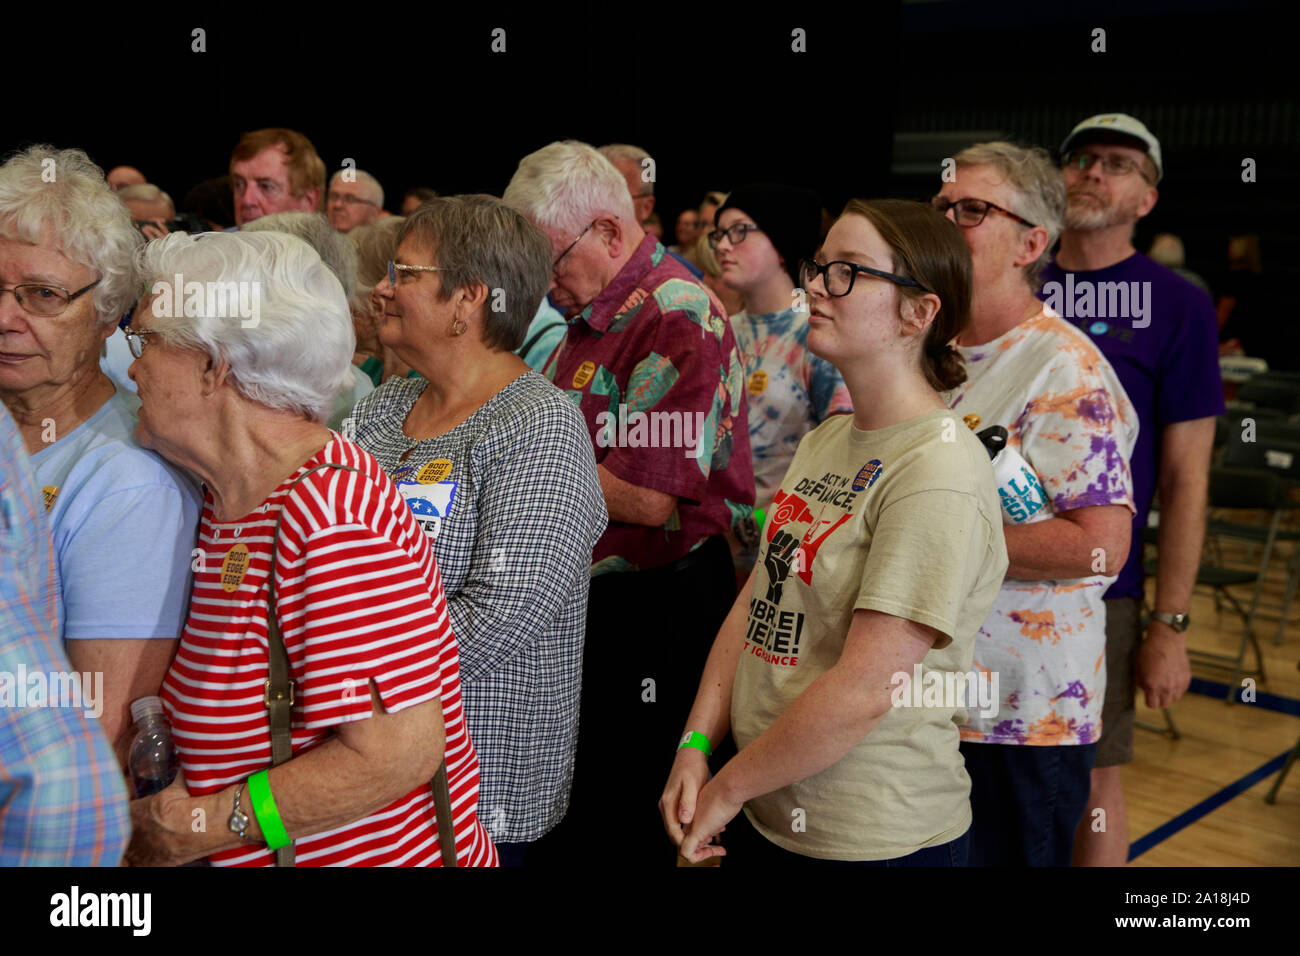 Supporters listen as South Bend, Indiana Mayor Pete Buttigieg, who is running for the Democratic nomination for president of the United States, campaigns Tuesday, September 24, 2019 at St. Ambrose University in Davenport, Iowa. Buttigieg was on a four day campaign bus tour of Iowa. Stock Photo